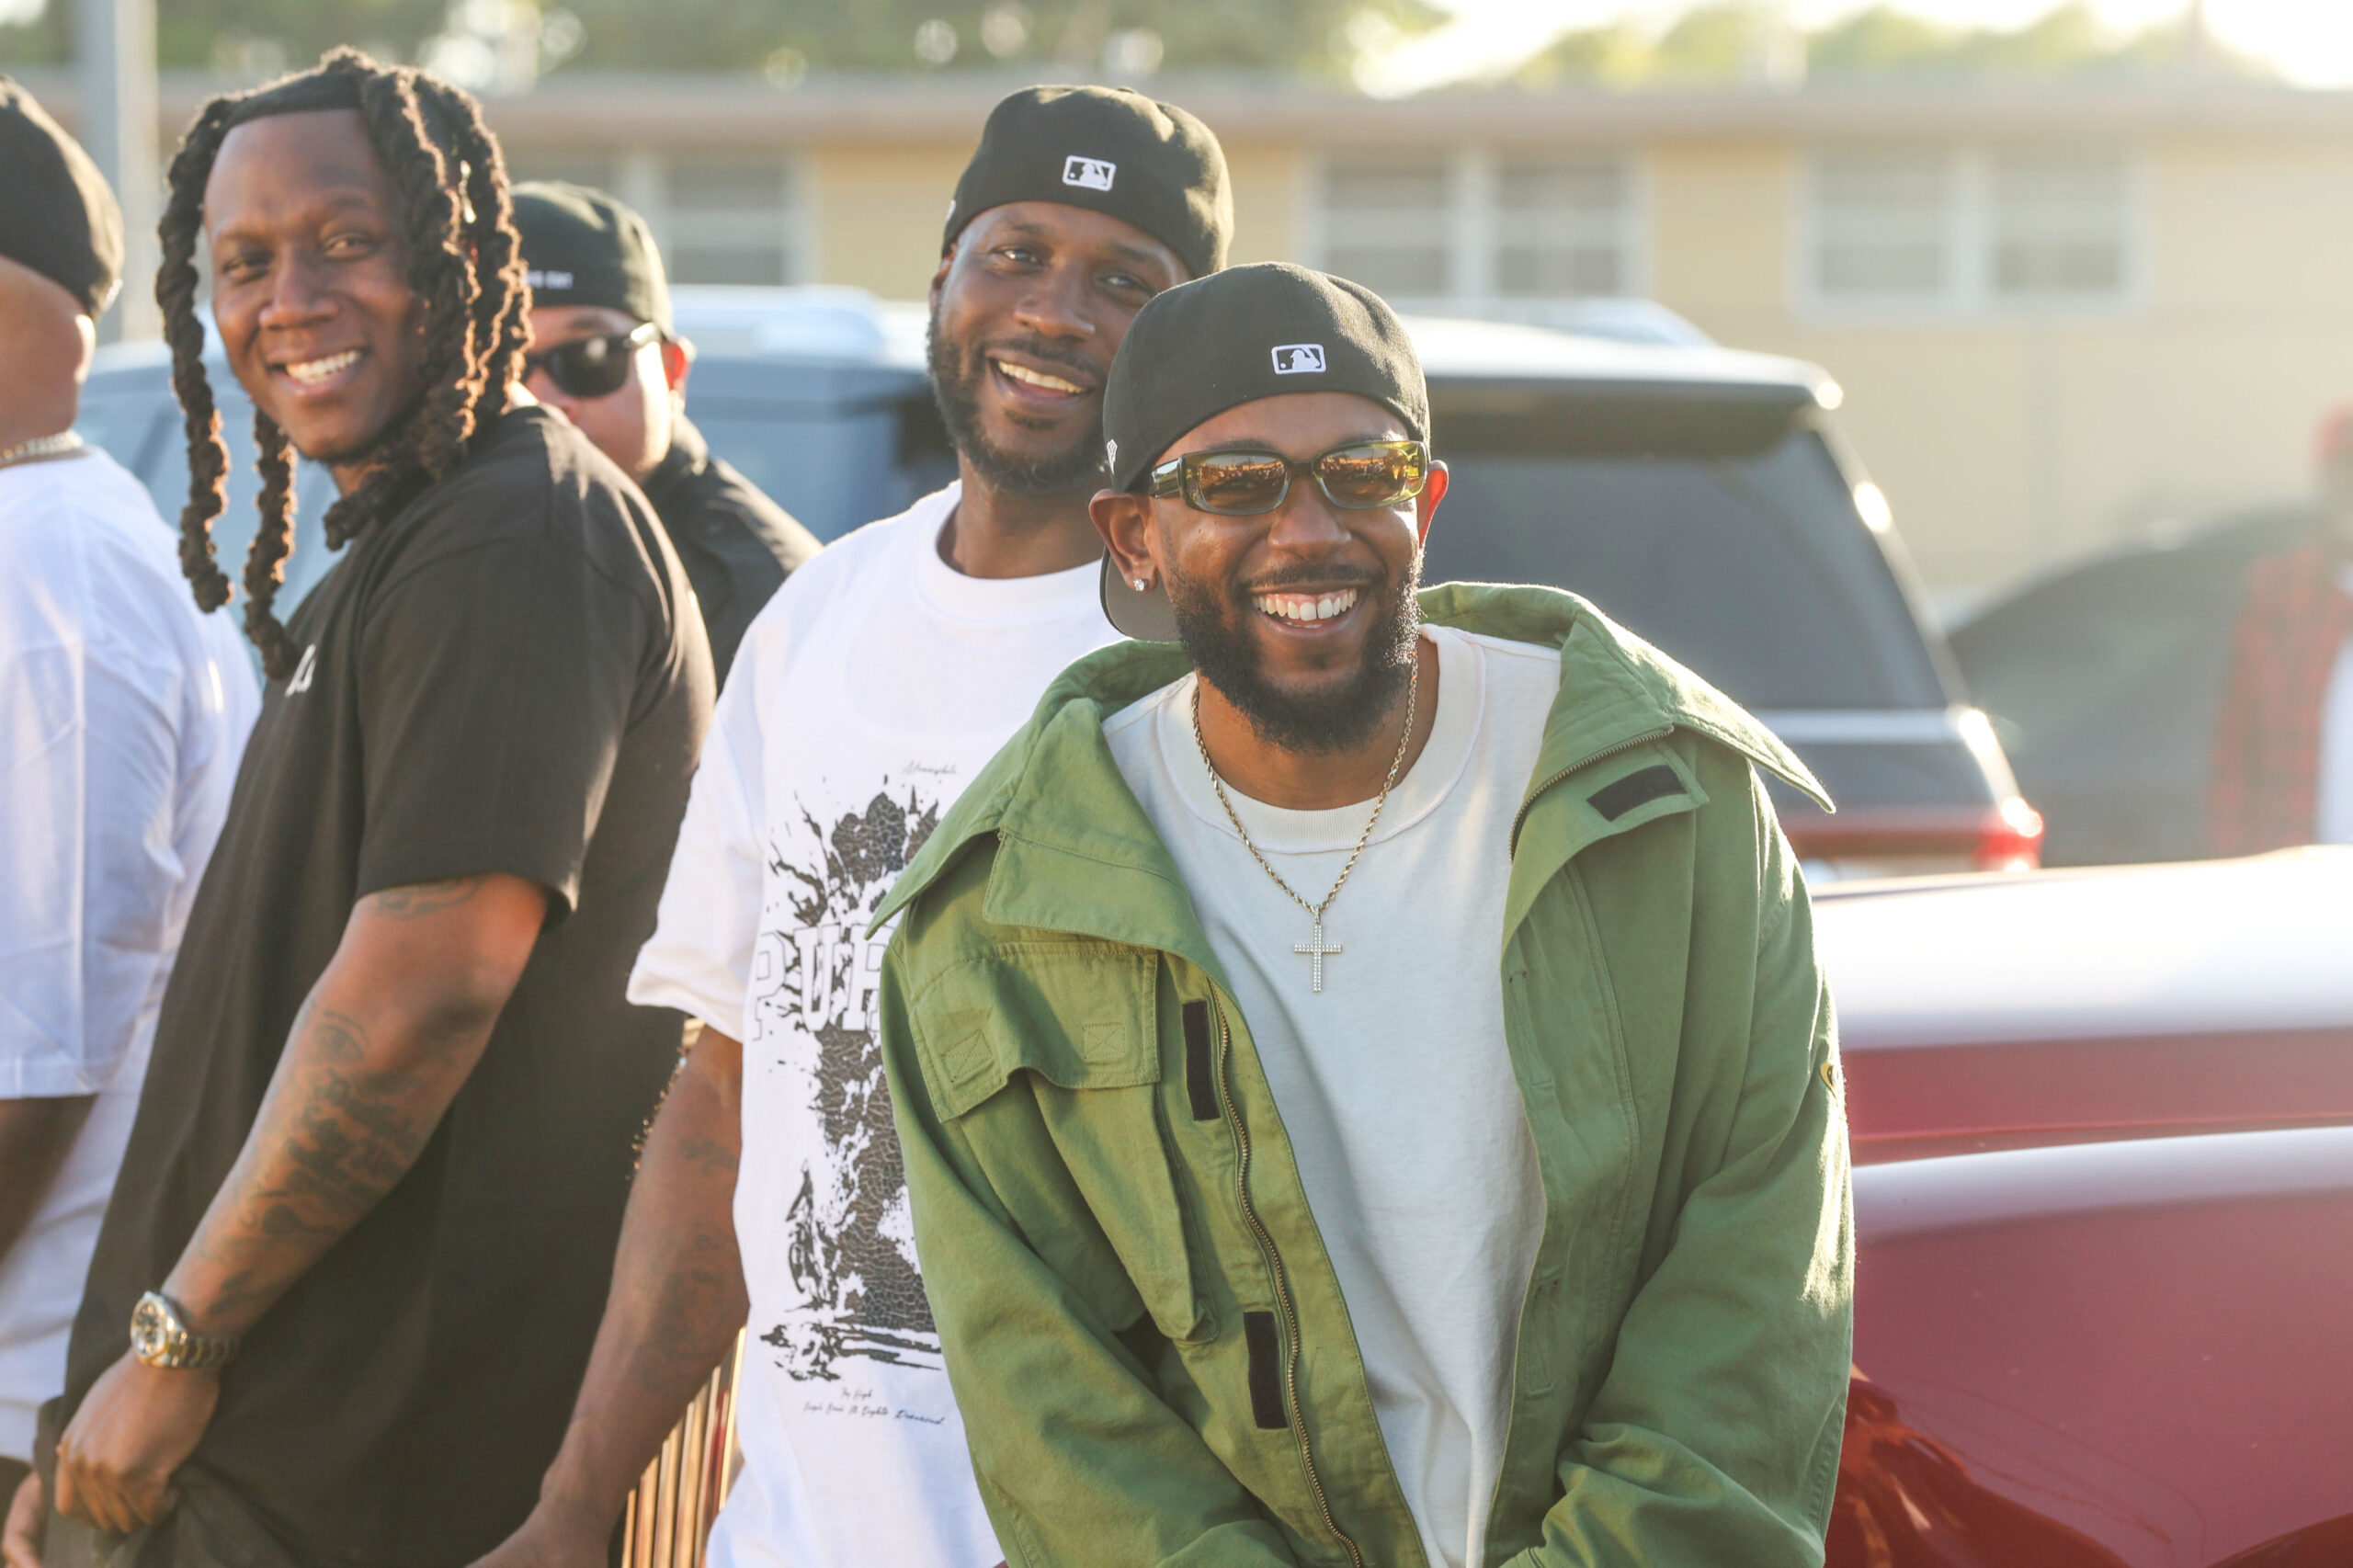 Kendrick Lamar, pgLang & Free Lunch Team Up To Donate $200K To LA Charities